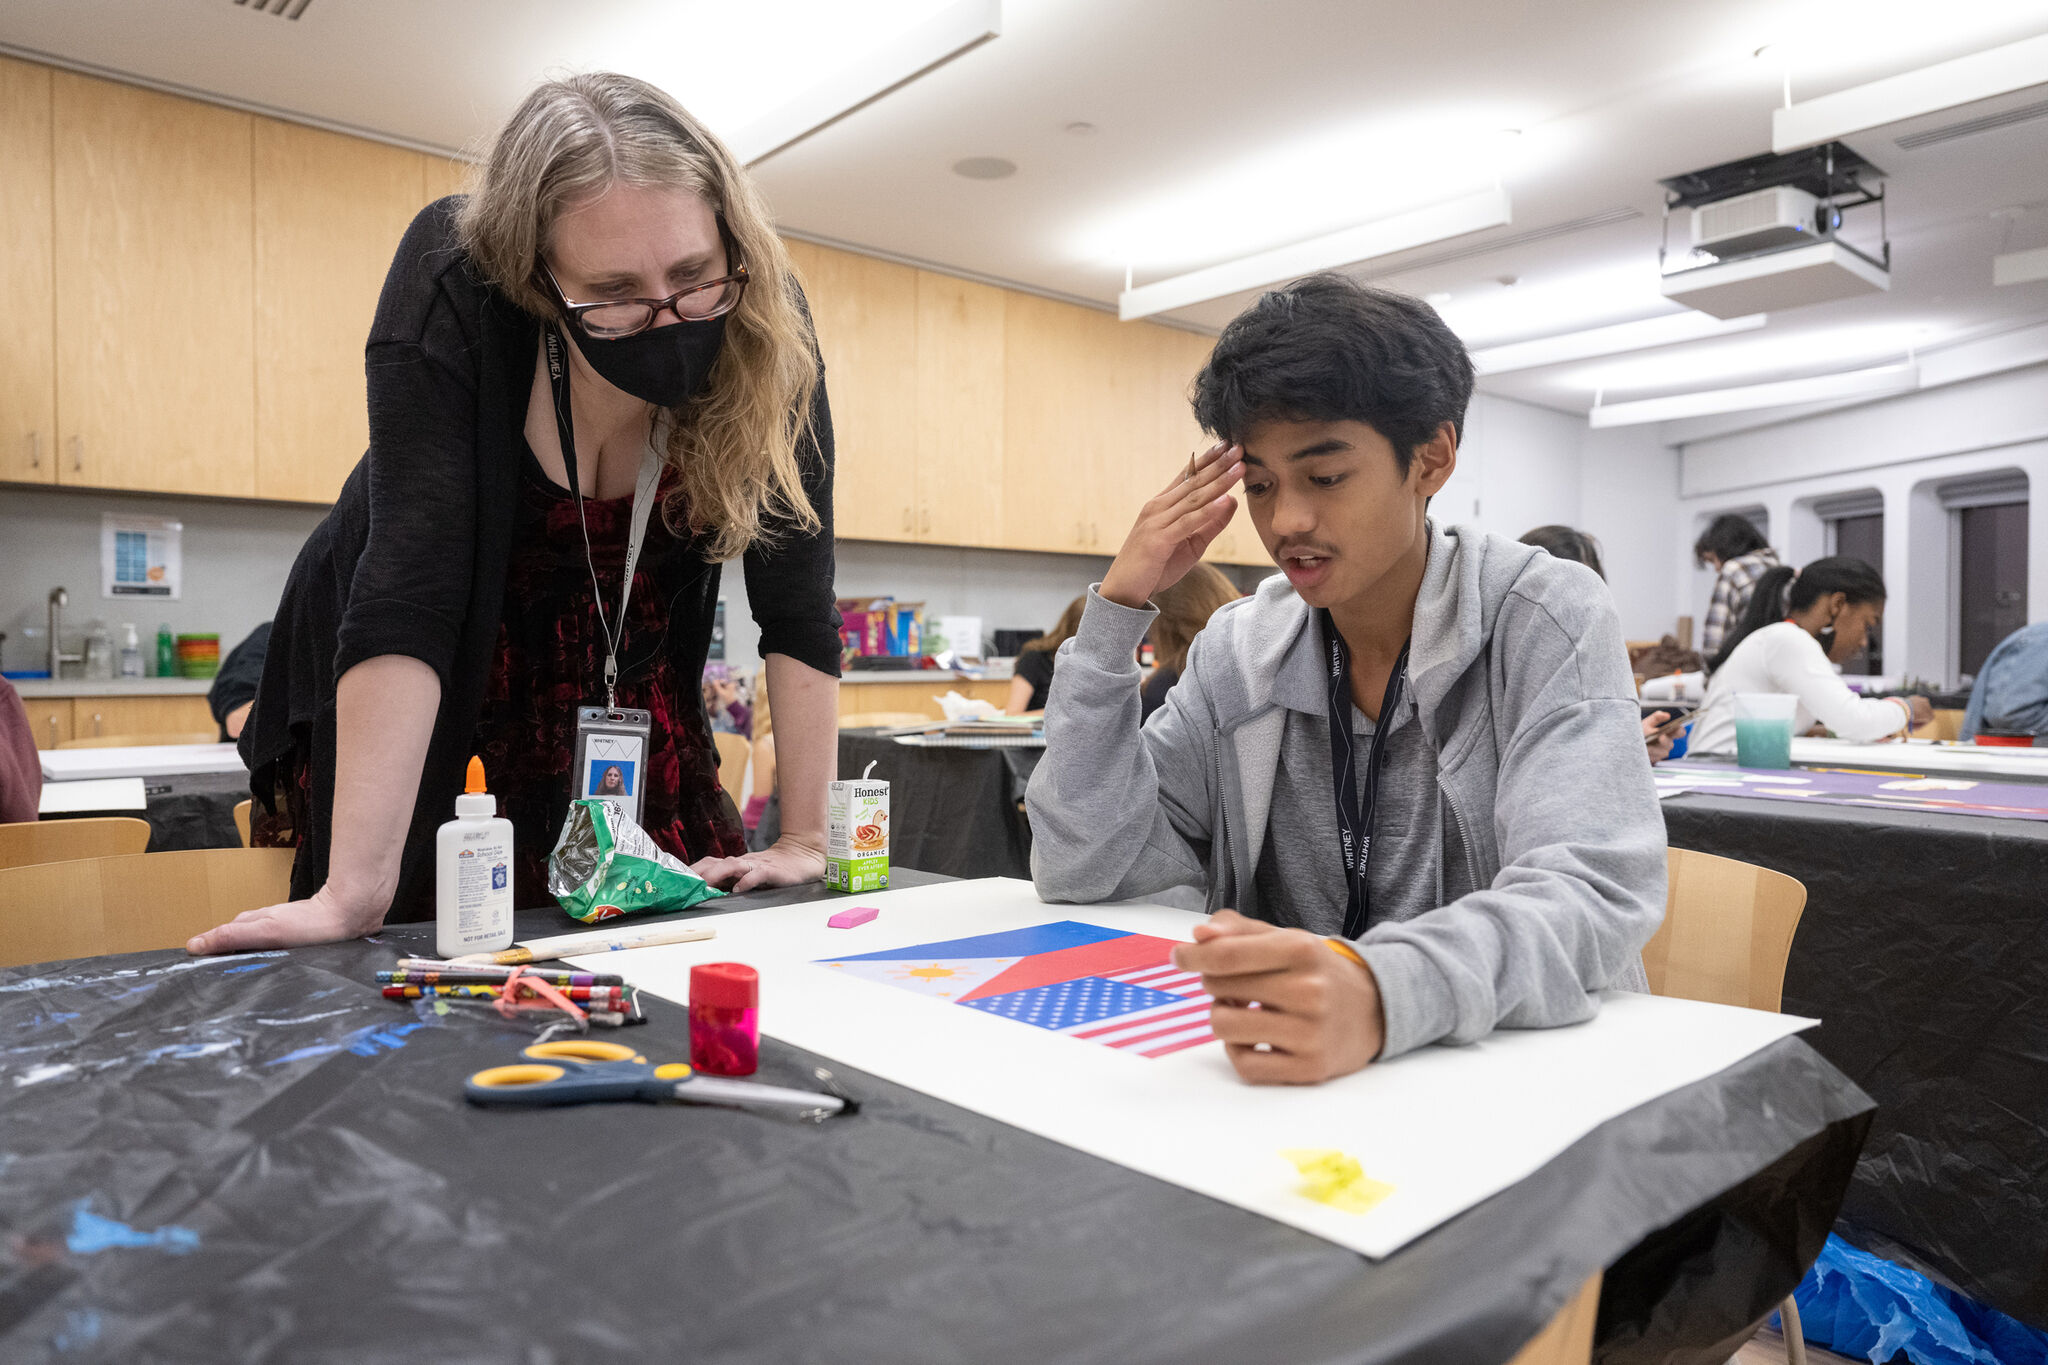 Teen discusses their artwork with educator, Kristin Roeder.